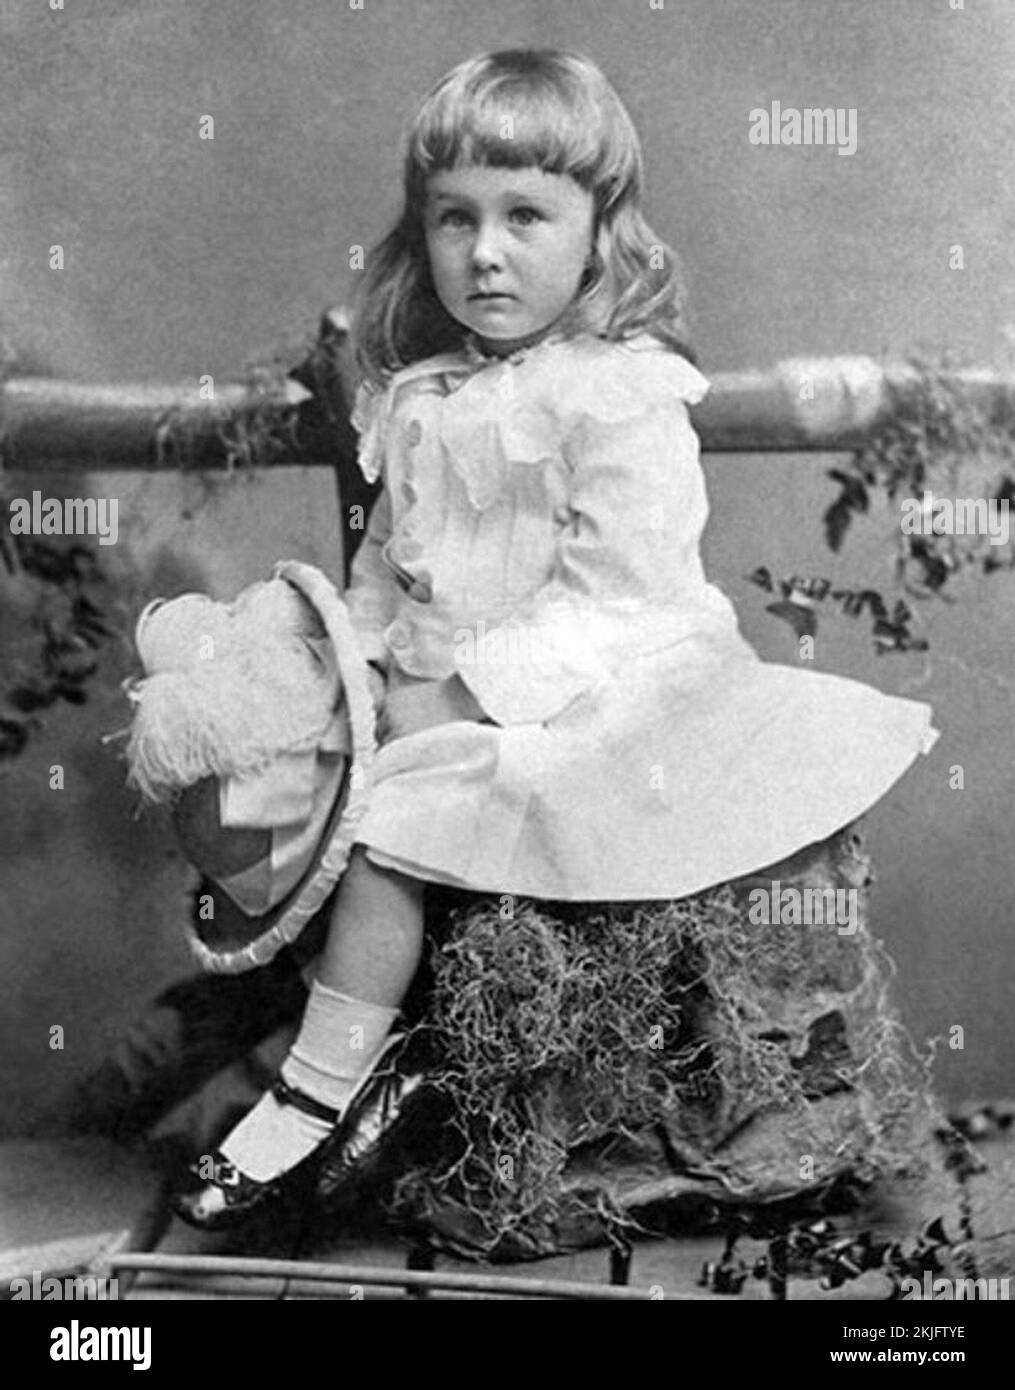 President Franklin Roosevelt in 1884, 2 years old. He has not been breeched - in this time boys wore dresses until they were breeched - ie put into trousers which was an important rite of passage Stock Photo